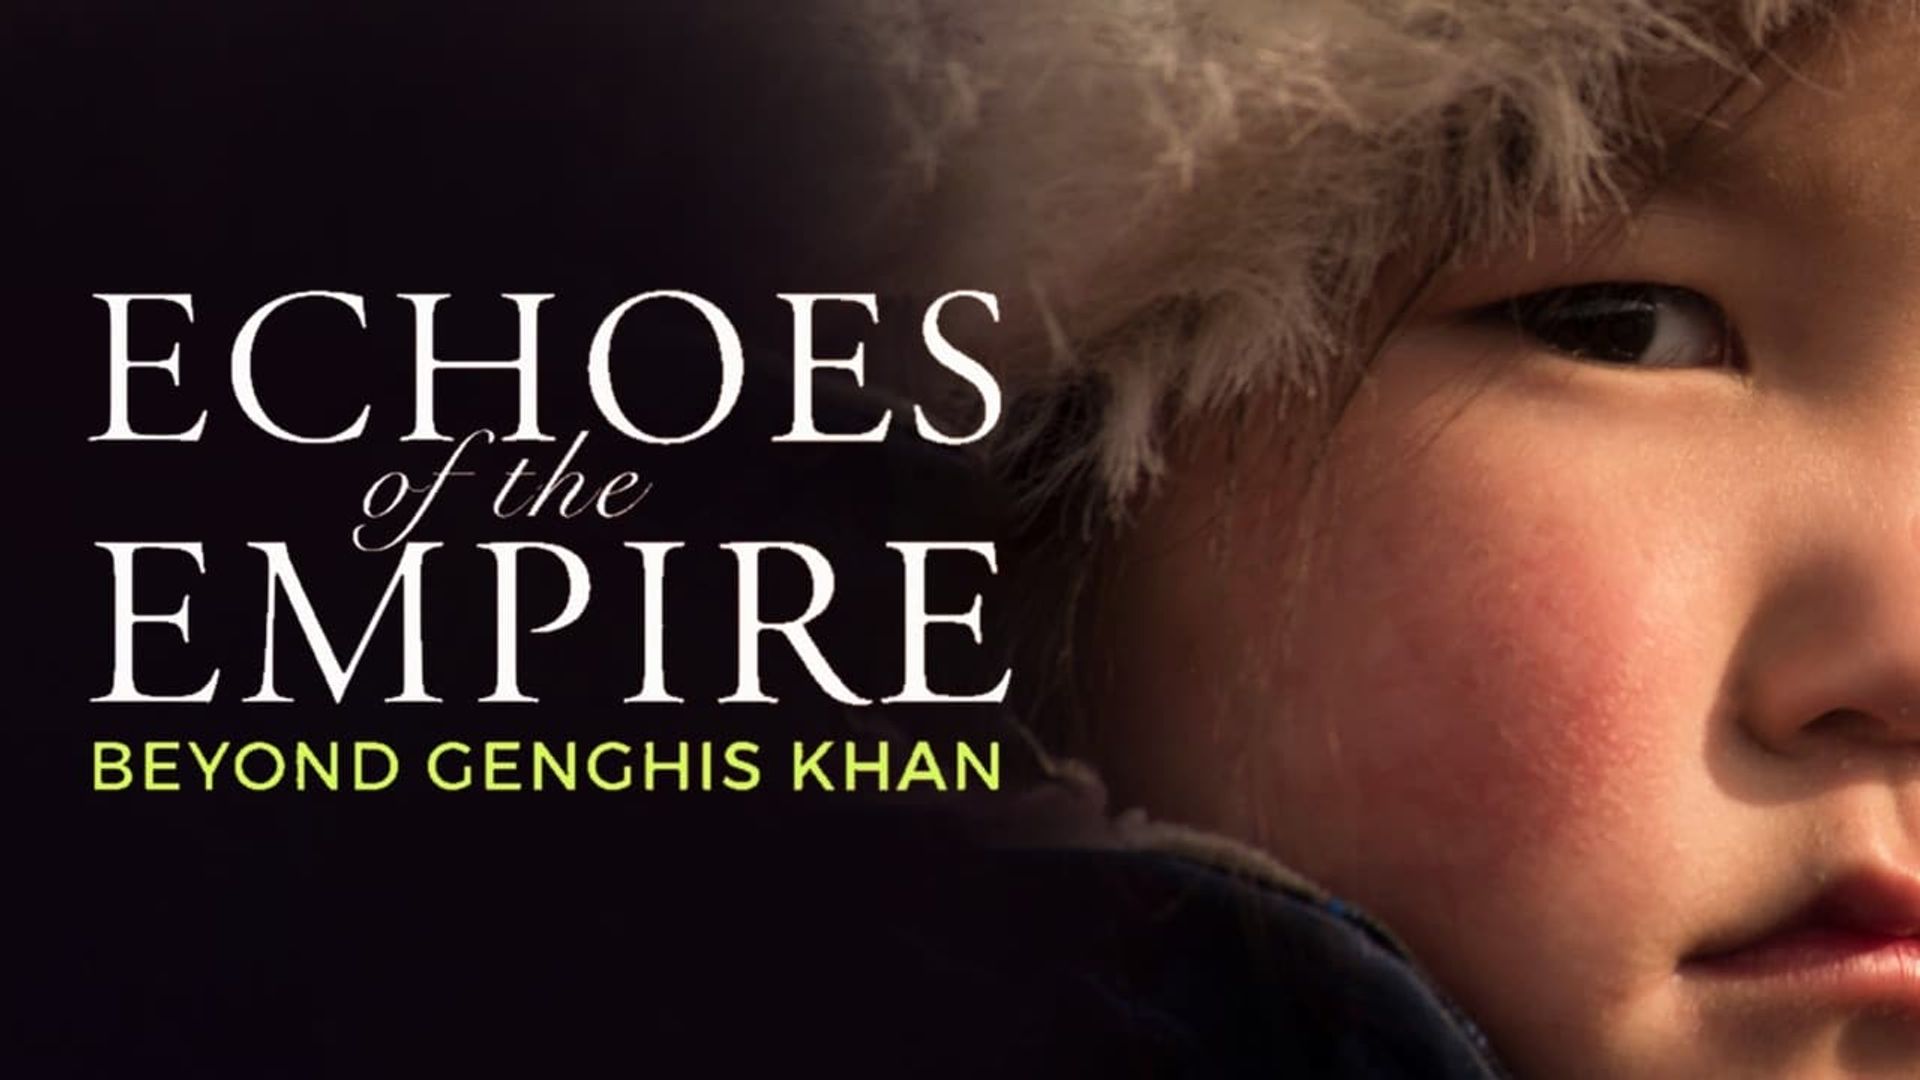 Echoes of the Empire: Beyond Genghis Khan background